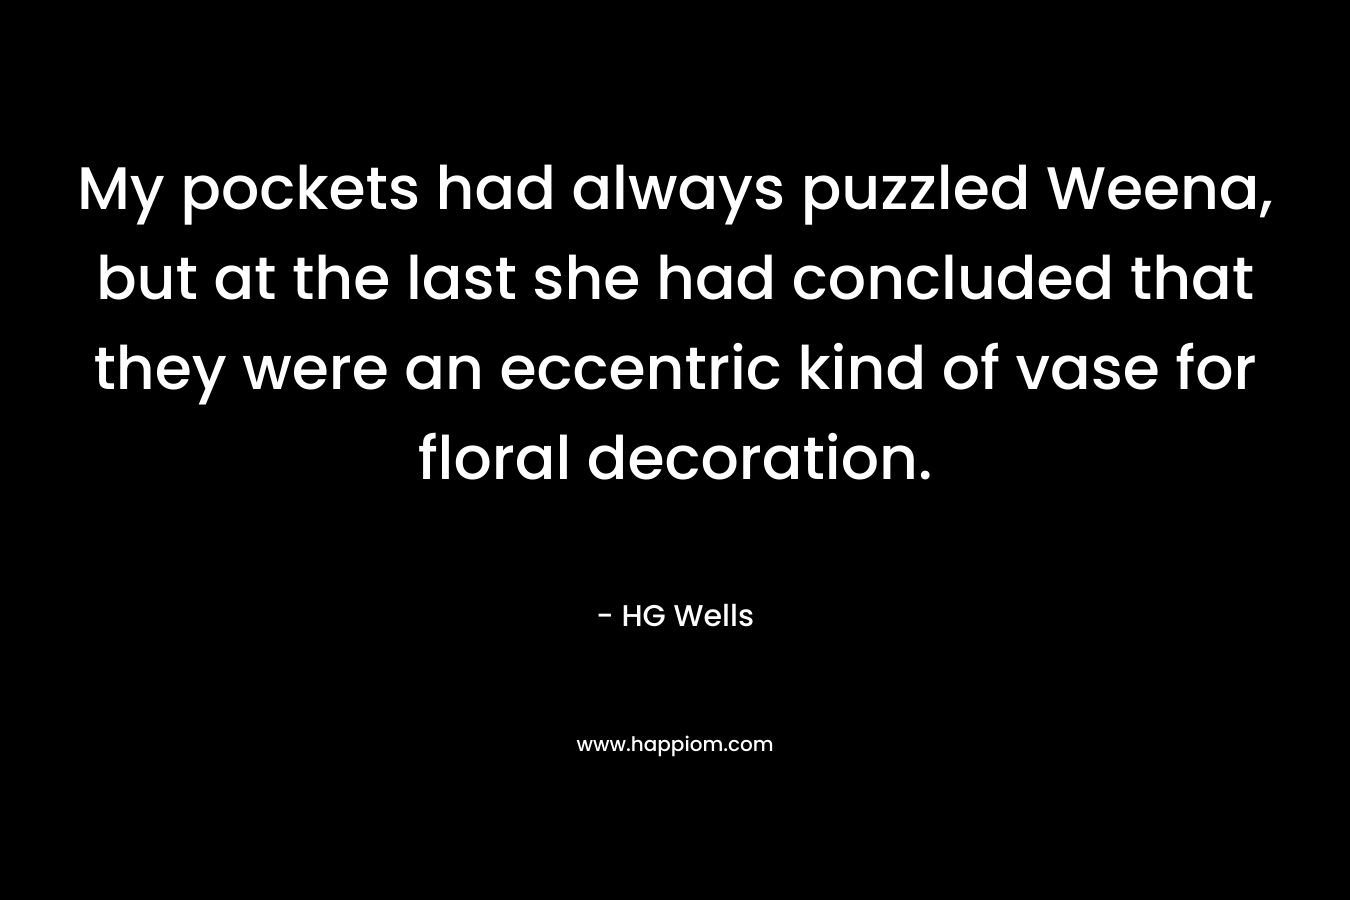 My pockets had always puzzled Weena, but at the last she had concluded that they were an eccentric kind of vase for floral decoration. – HG Wells